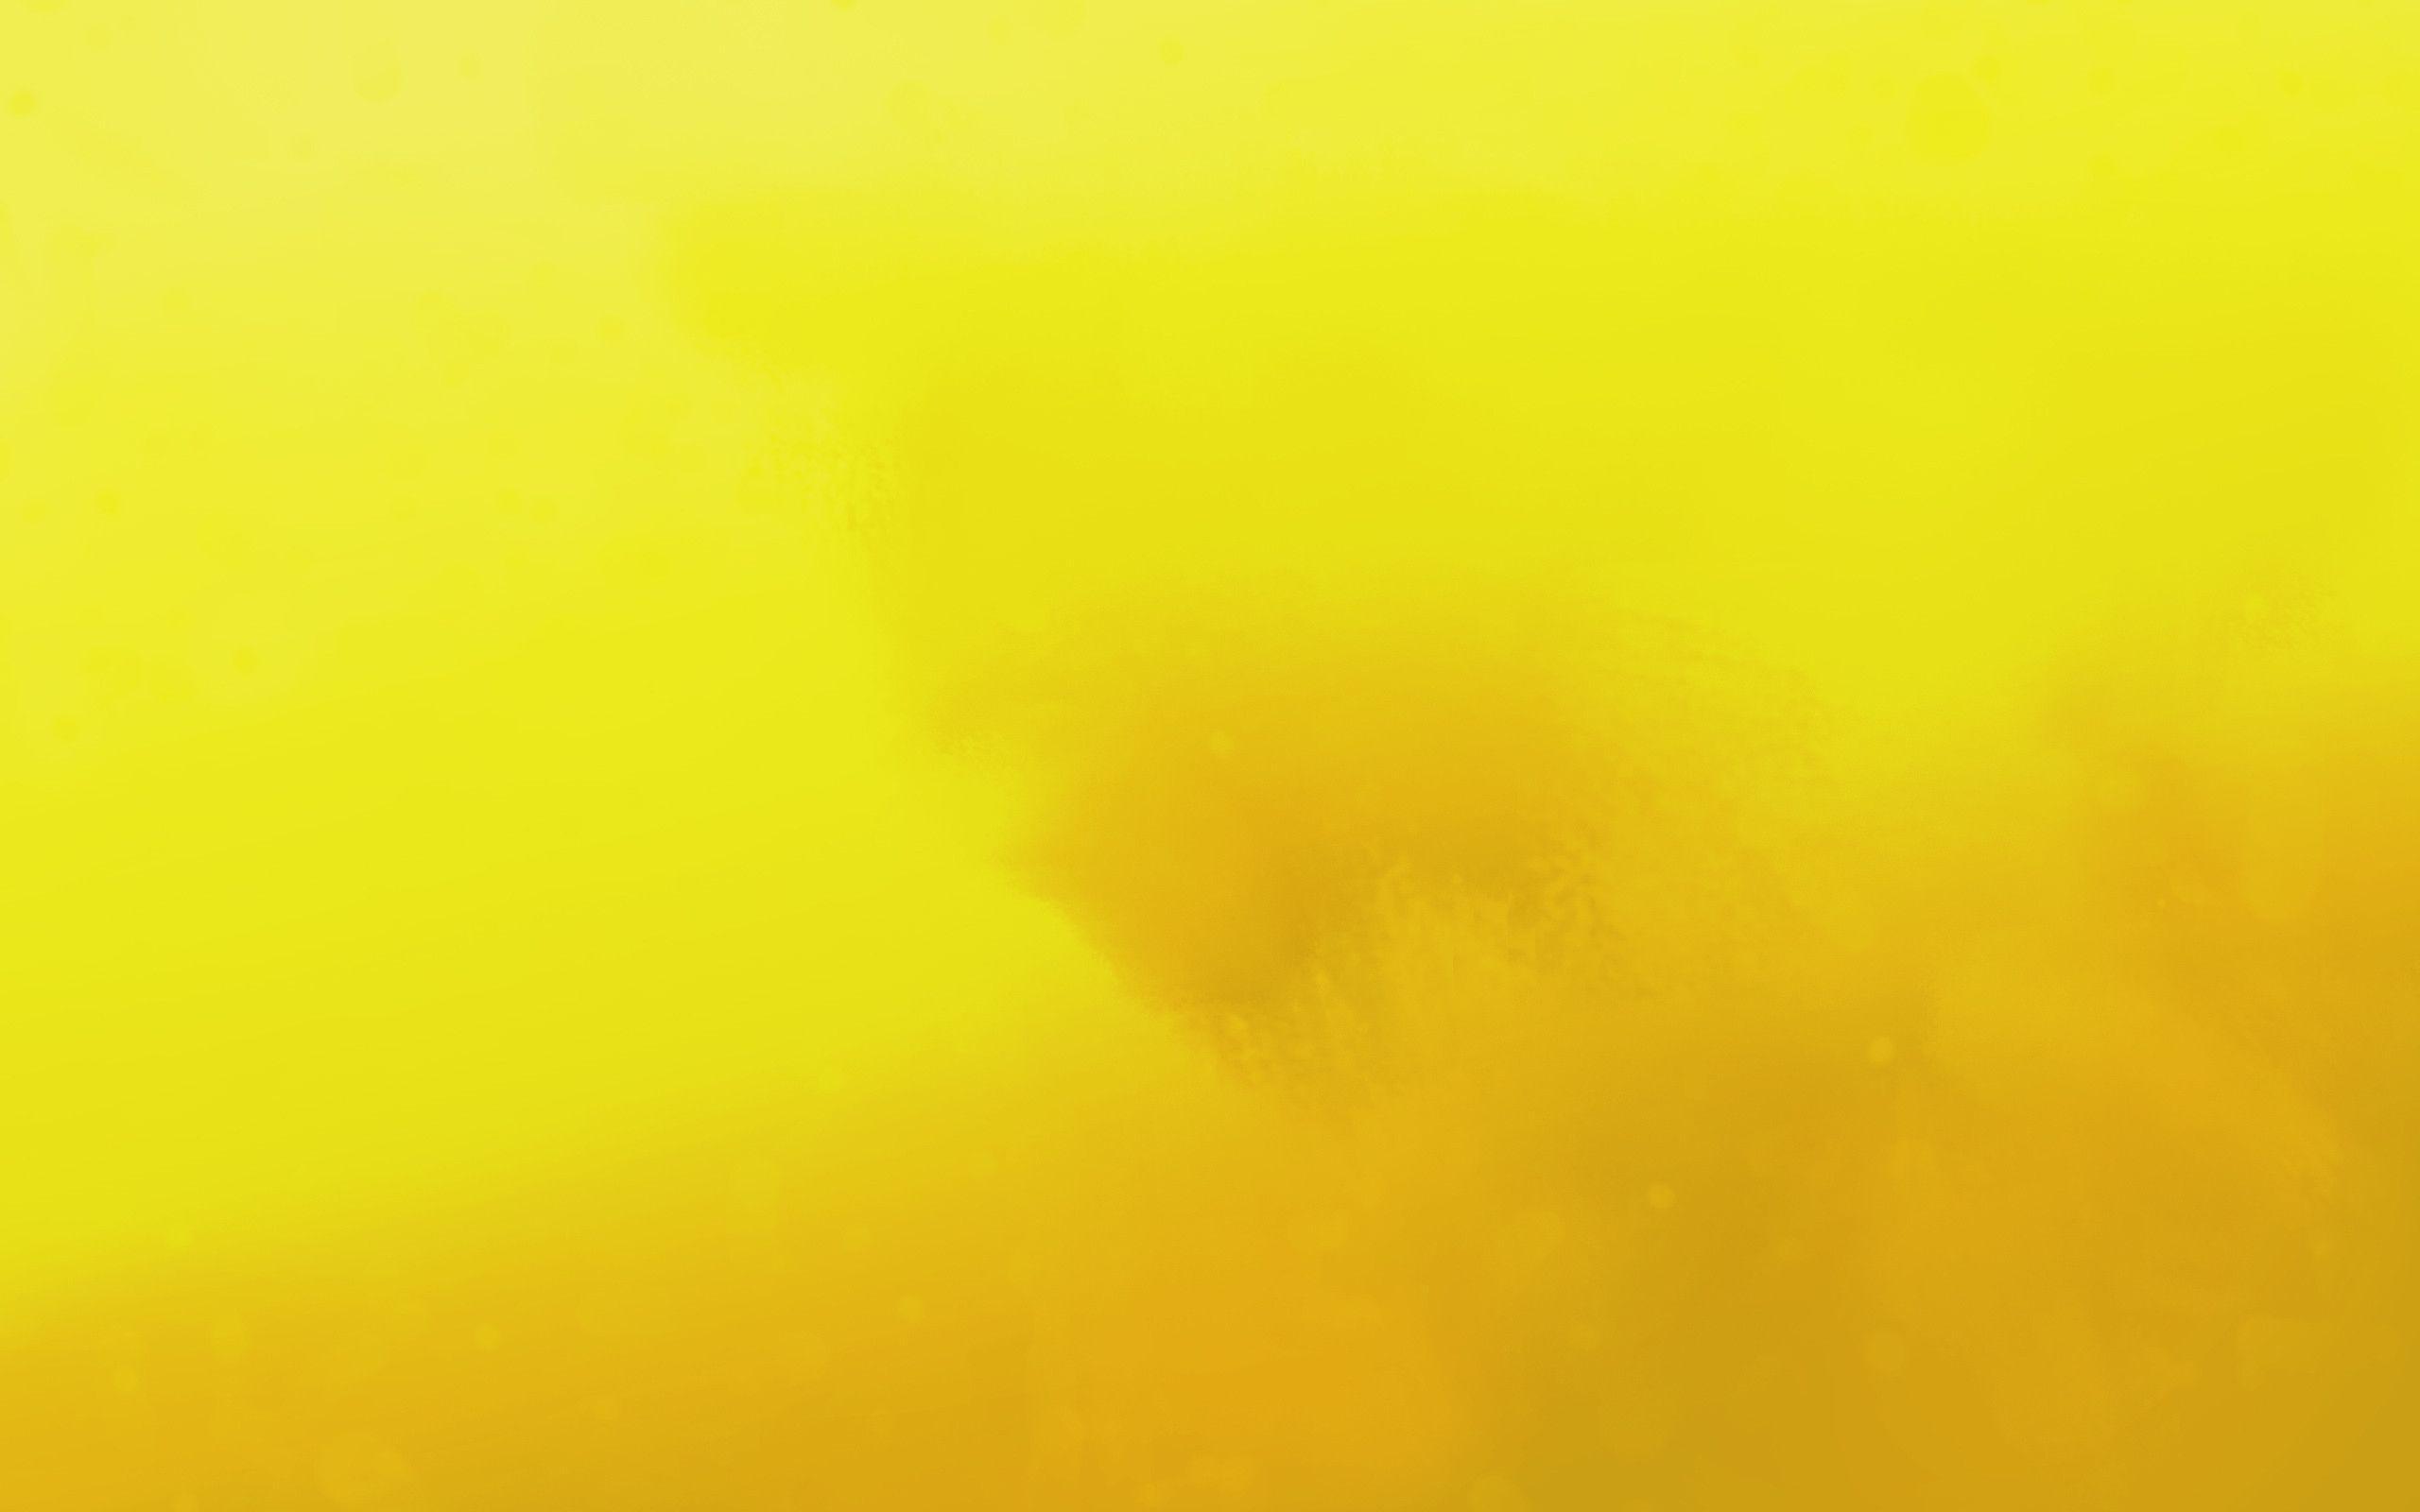 Download free Yellow desktop backgrounds for your computer